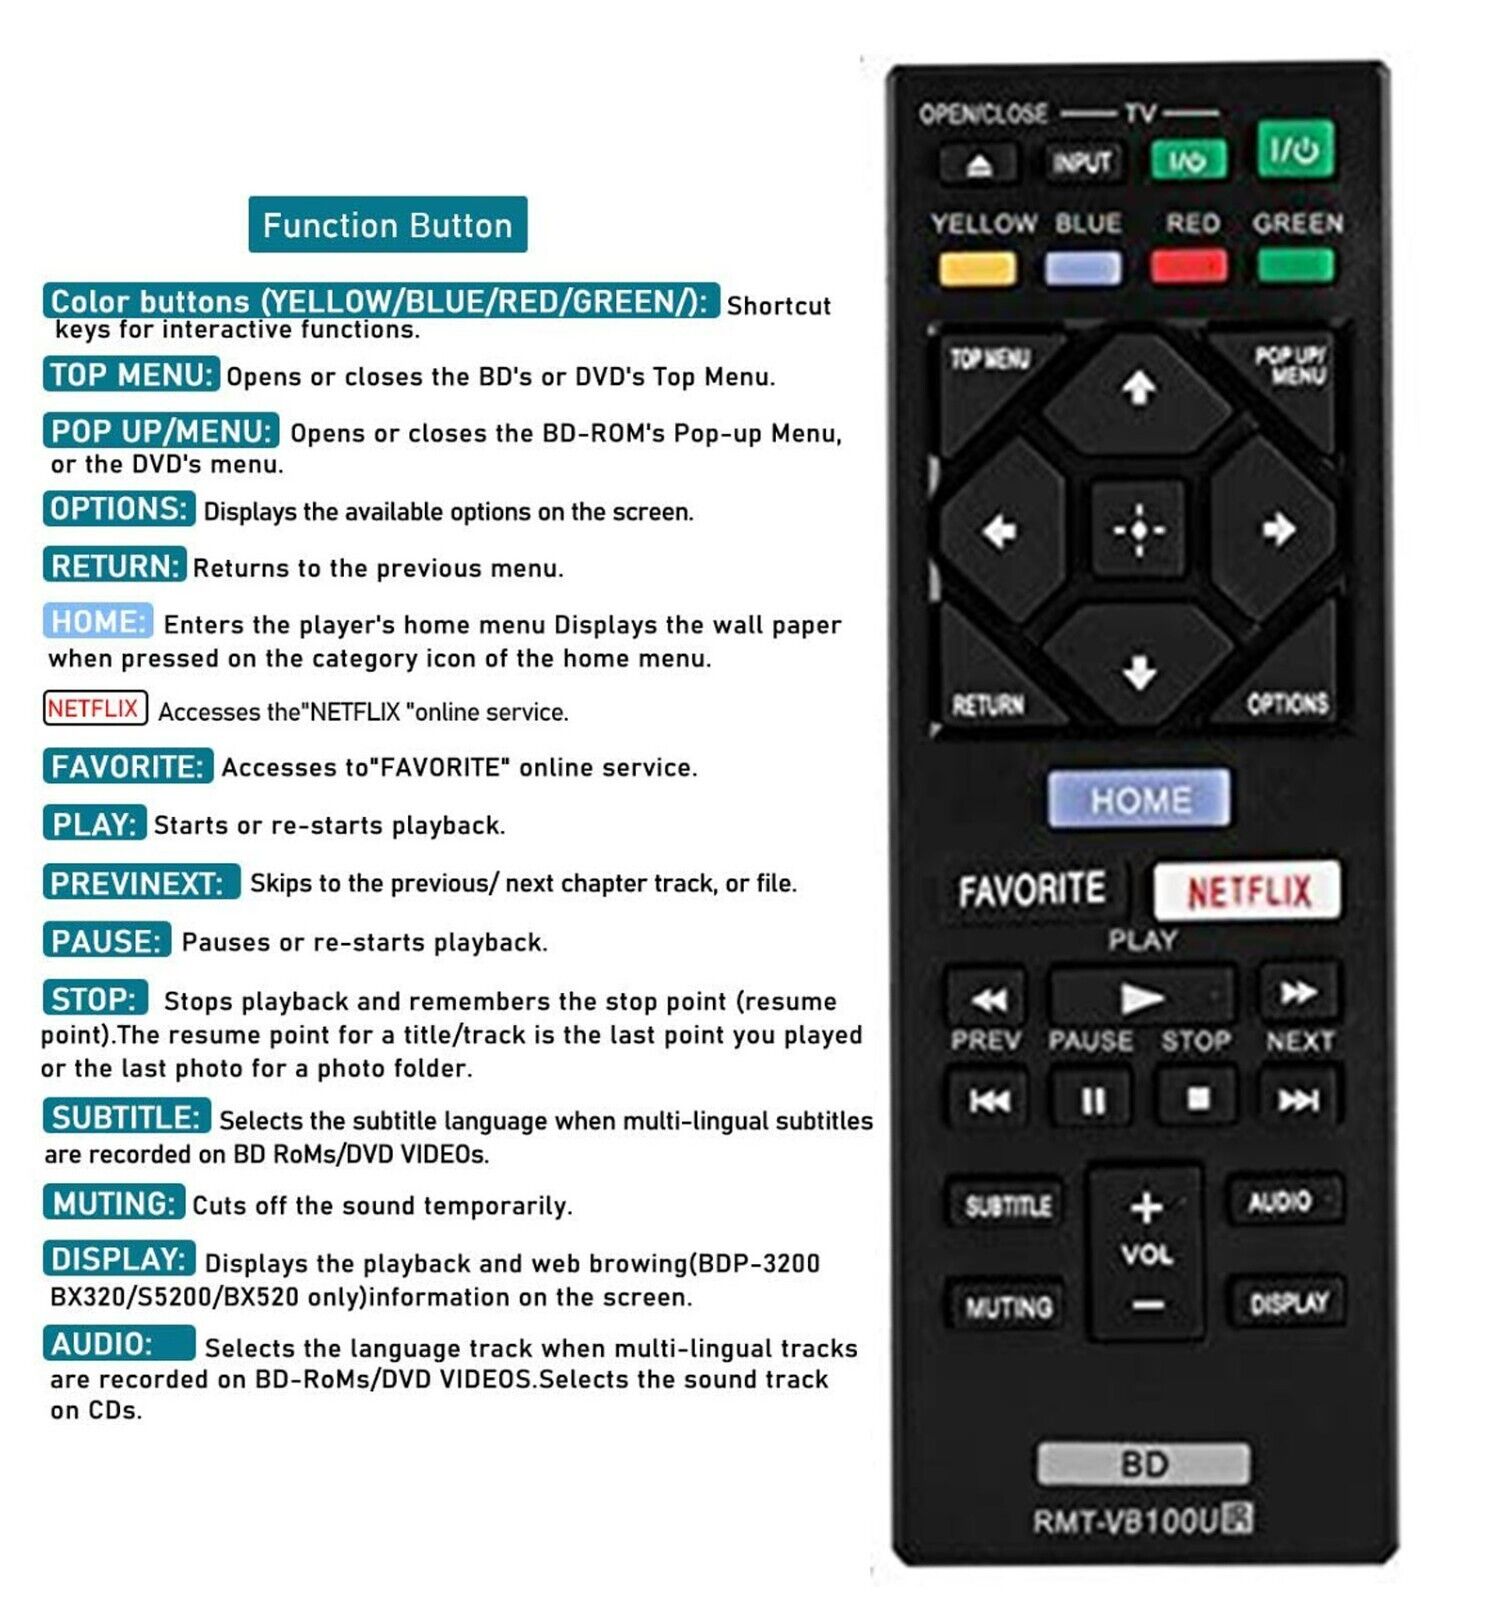 RMT-VB100U Remote Control Fit for Sony Blu-ray DVD Player BDP-S1500 BDP-BX150